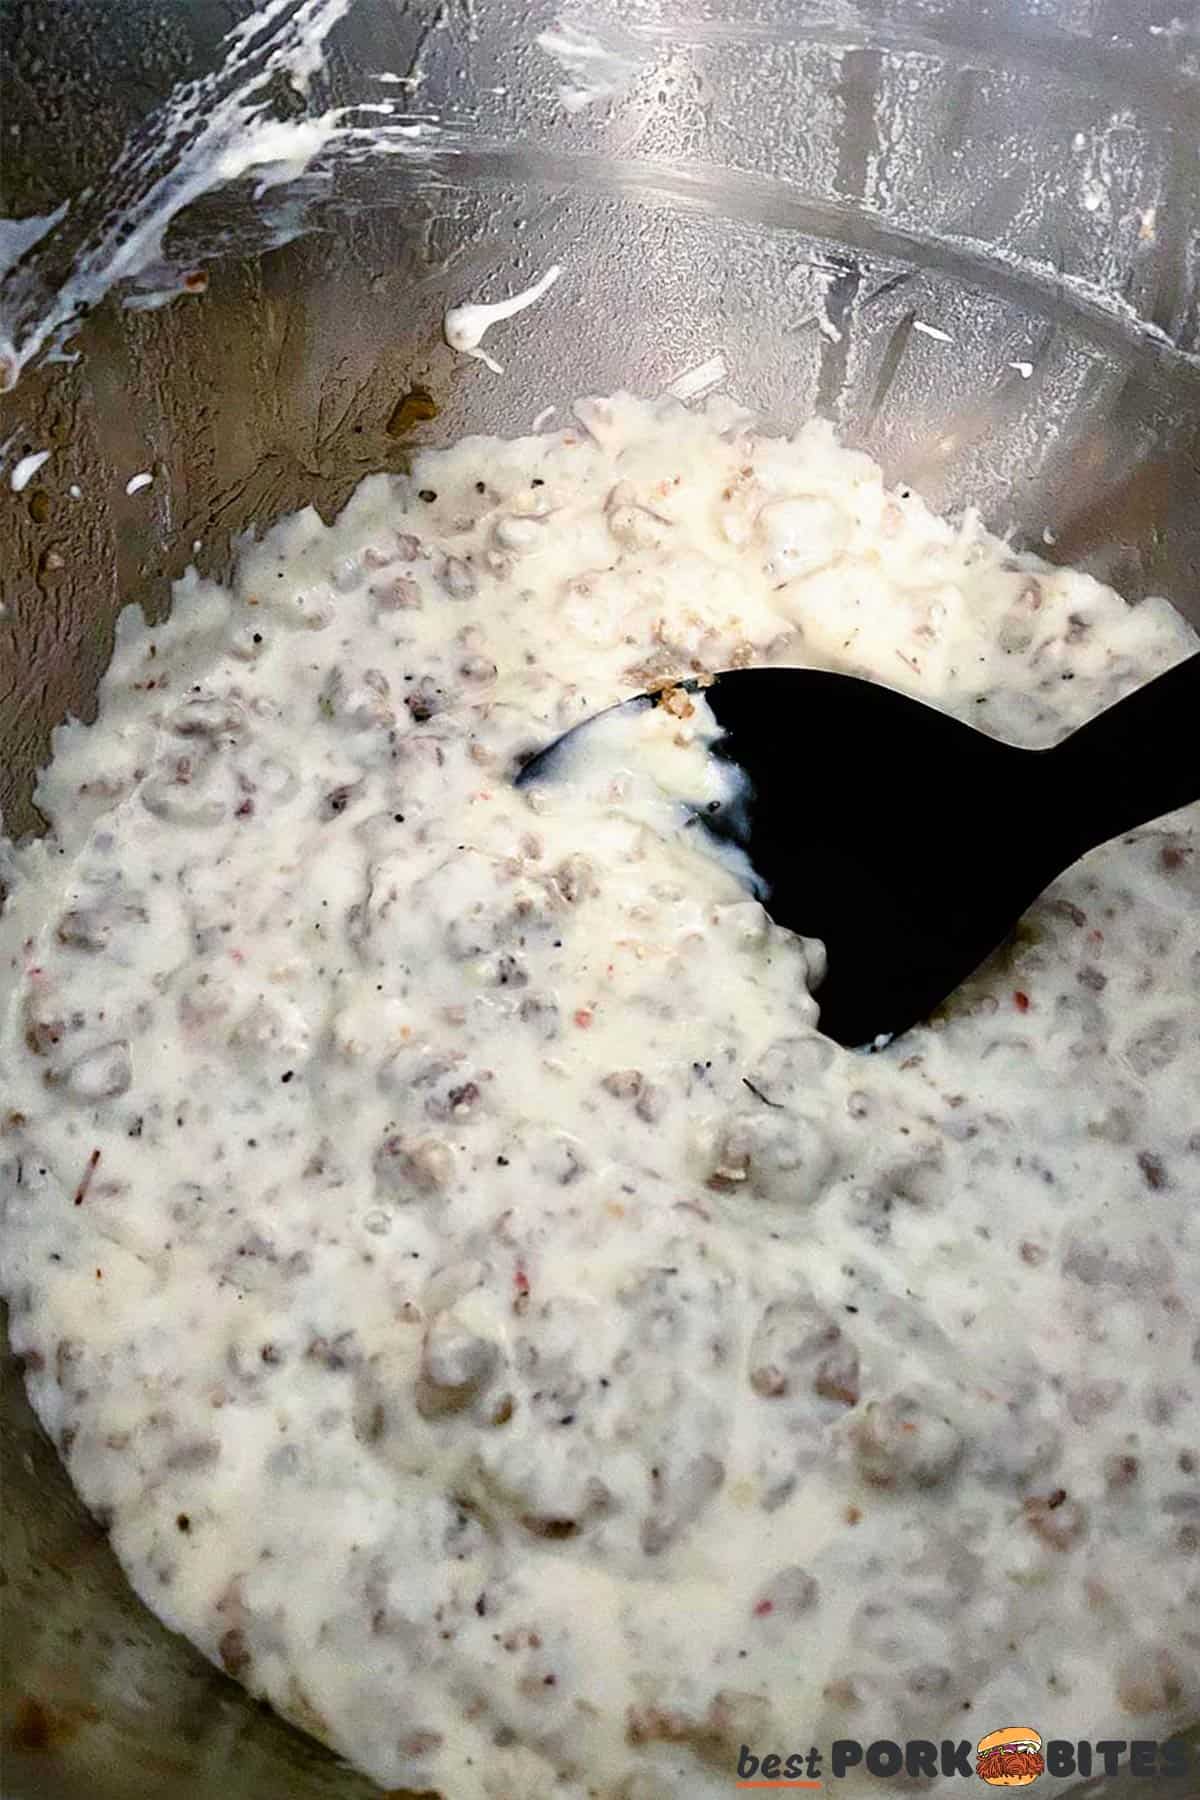 the sausage gravy after it has thickened with milk and flour